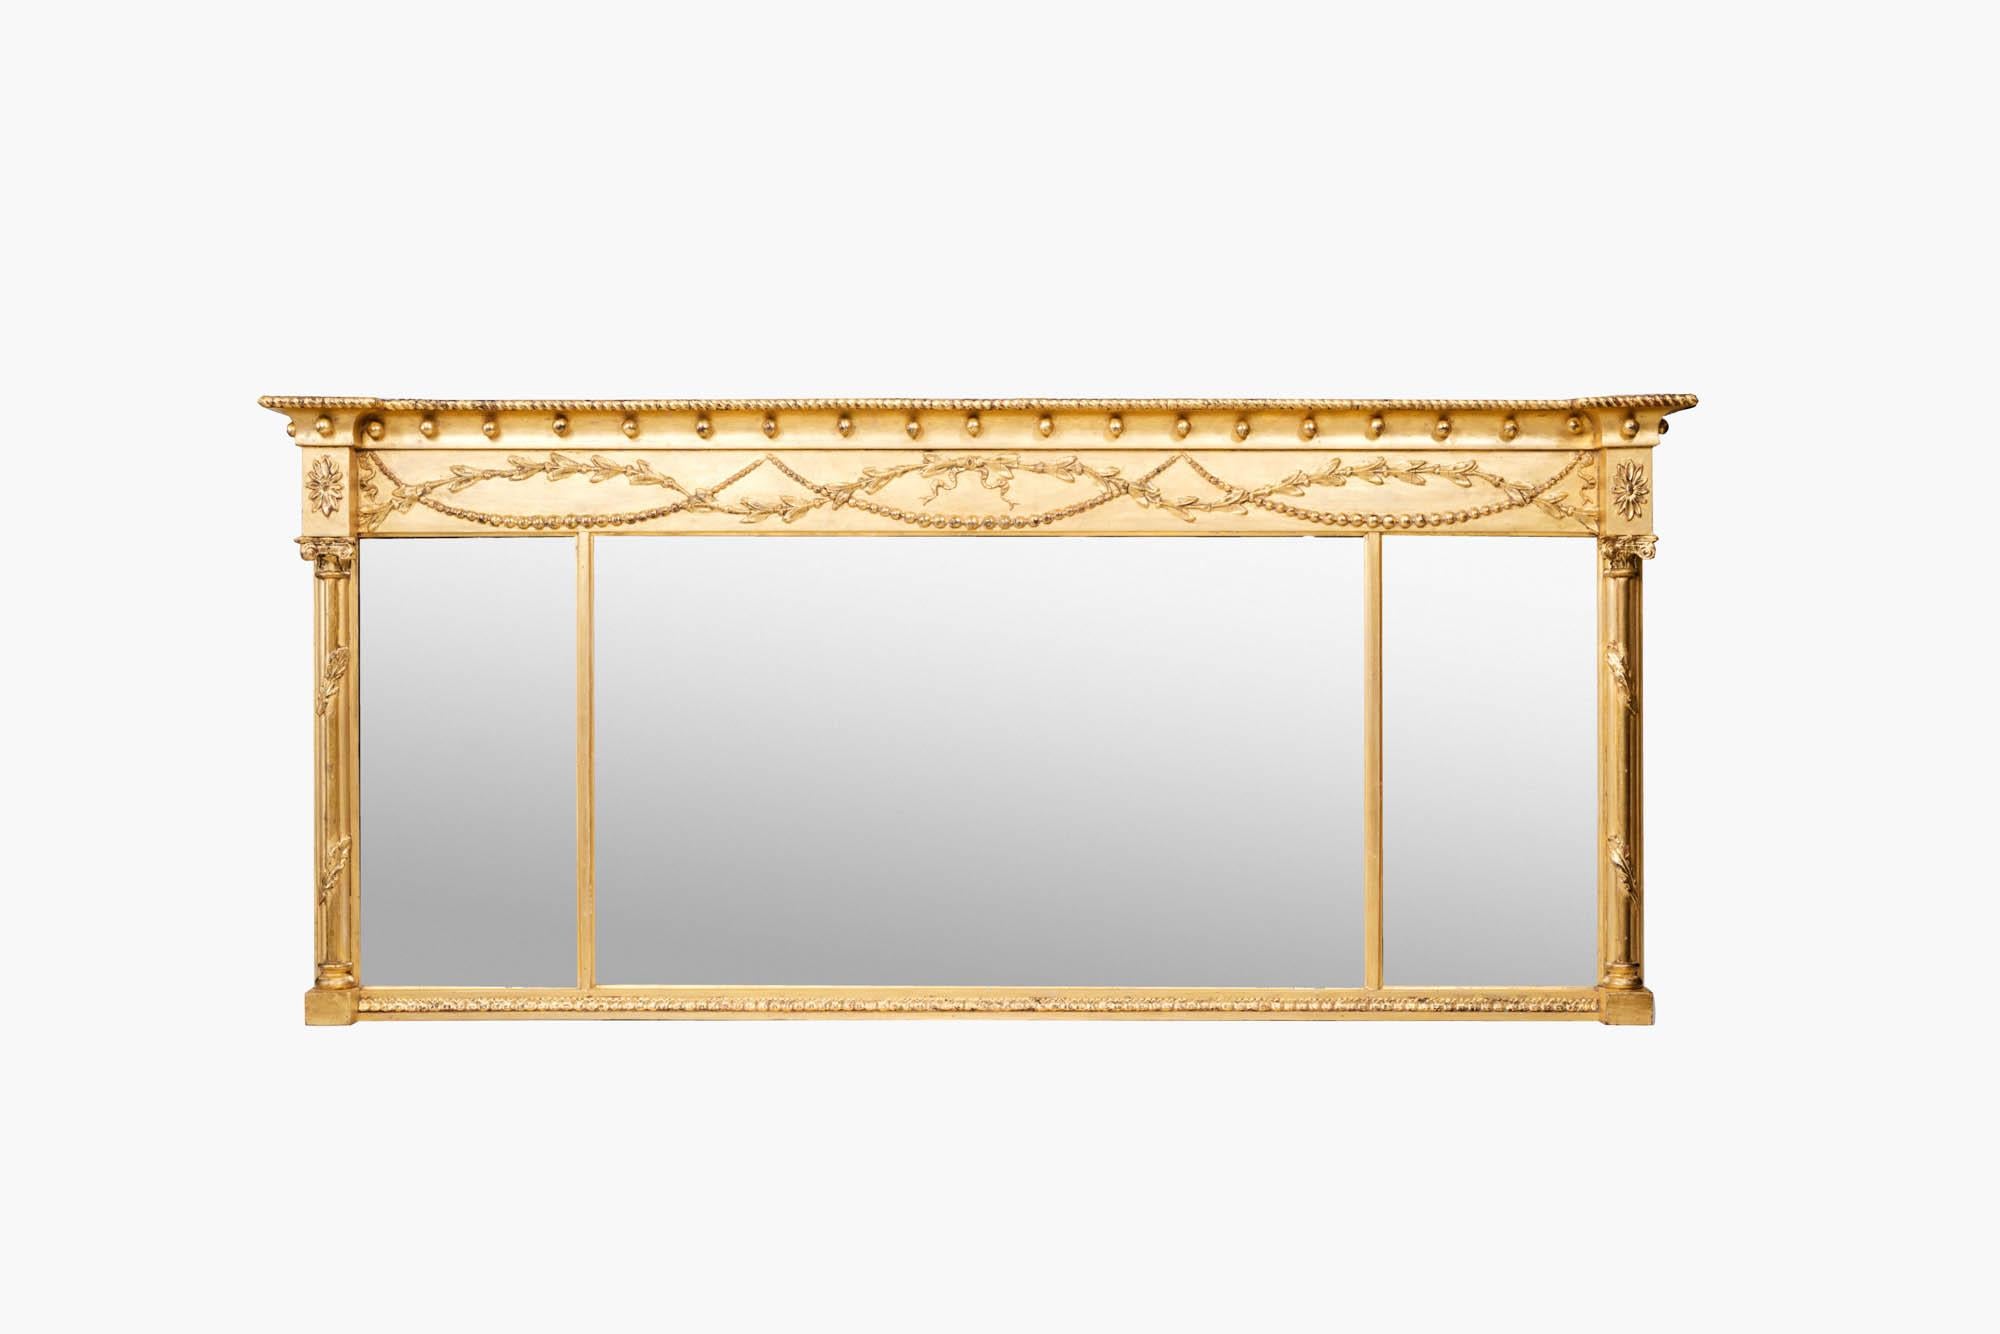 English 19th Century Regency Gilt Compartmental Overmantel Mirror For Sale